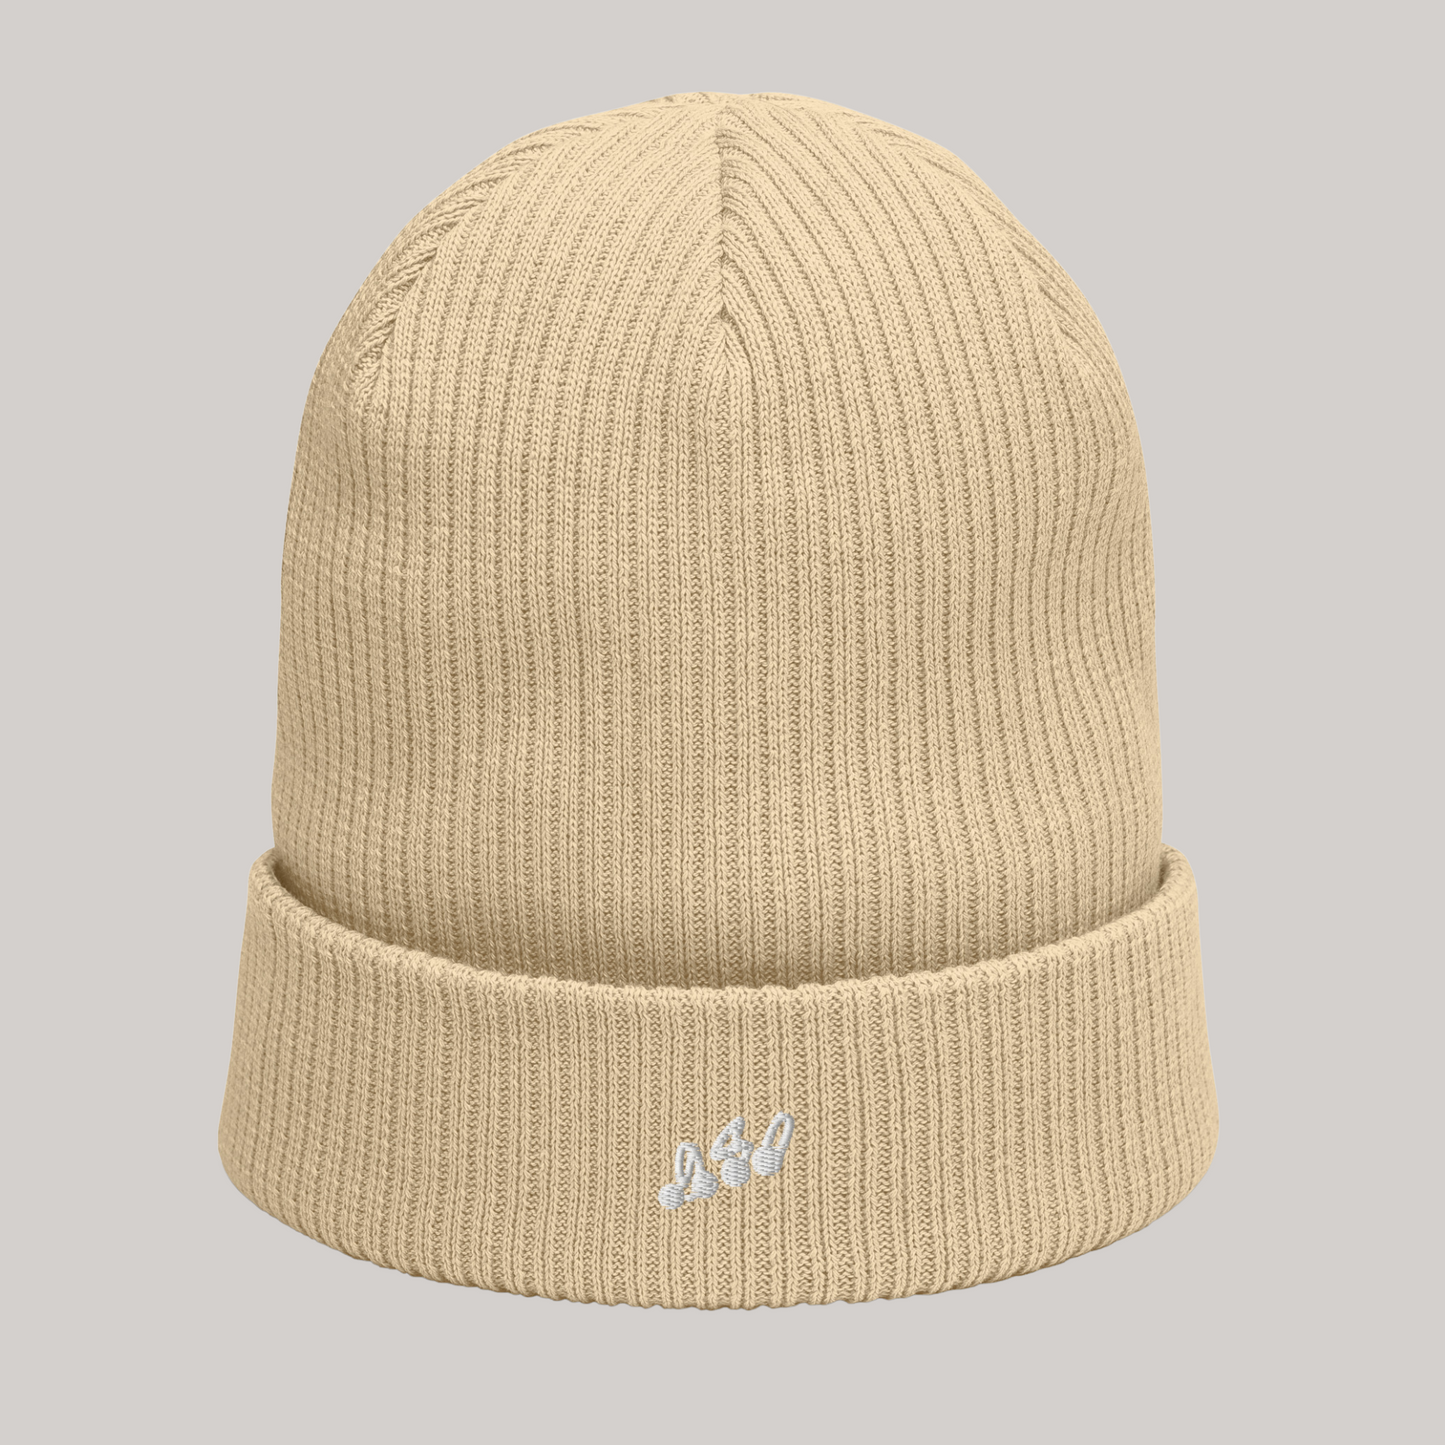 sand khaki light yellow beige ribbed beanie accessory headwear 980 collection embroidery white patch